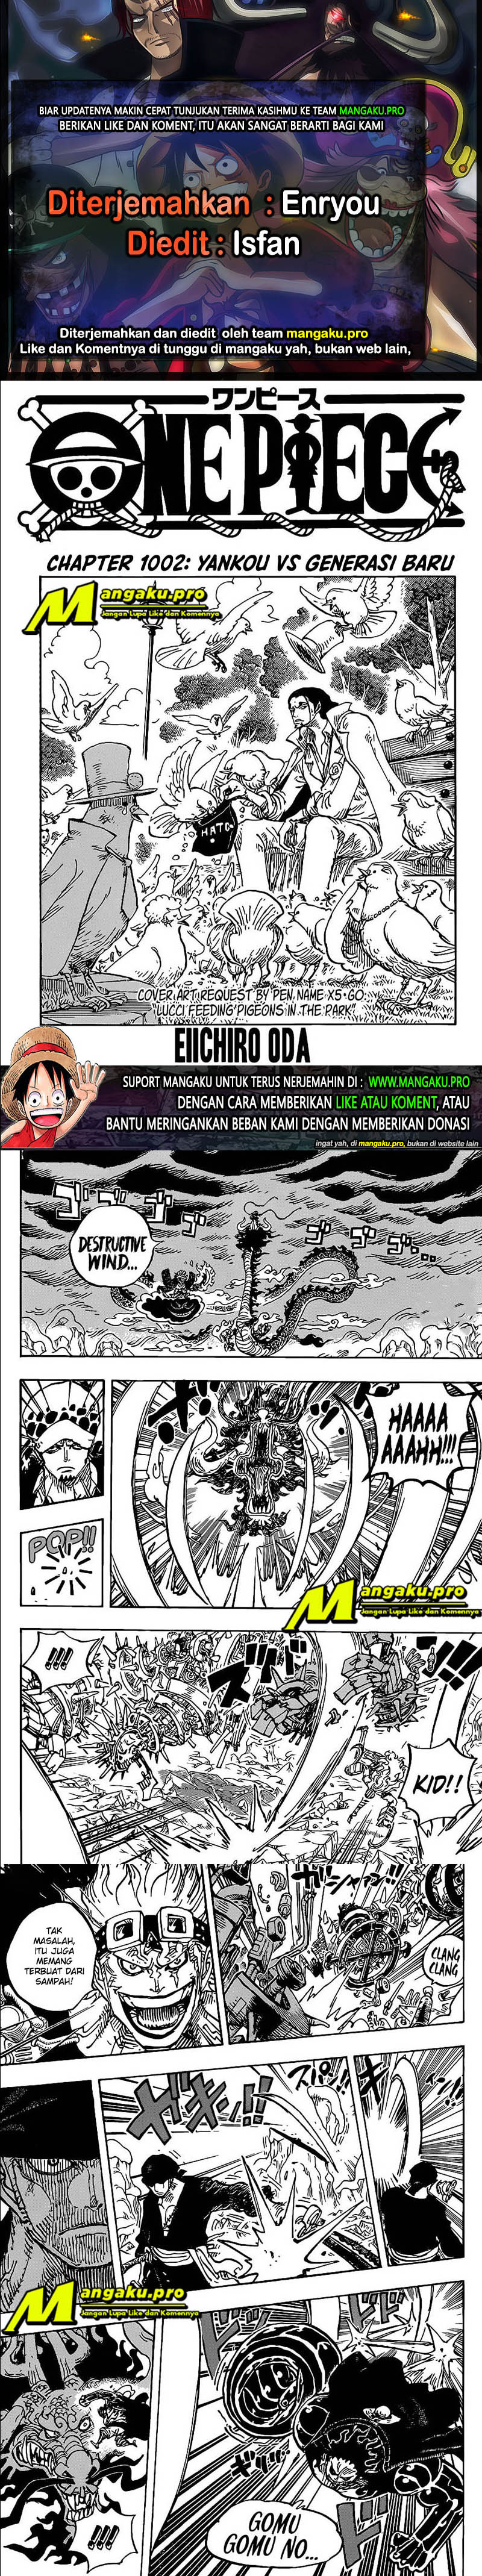 One Piece Chapter 1002 - 25